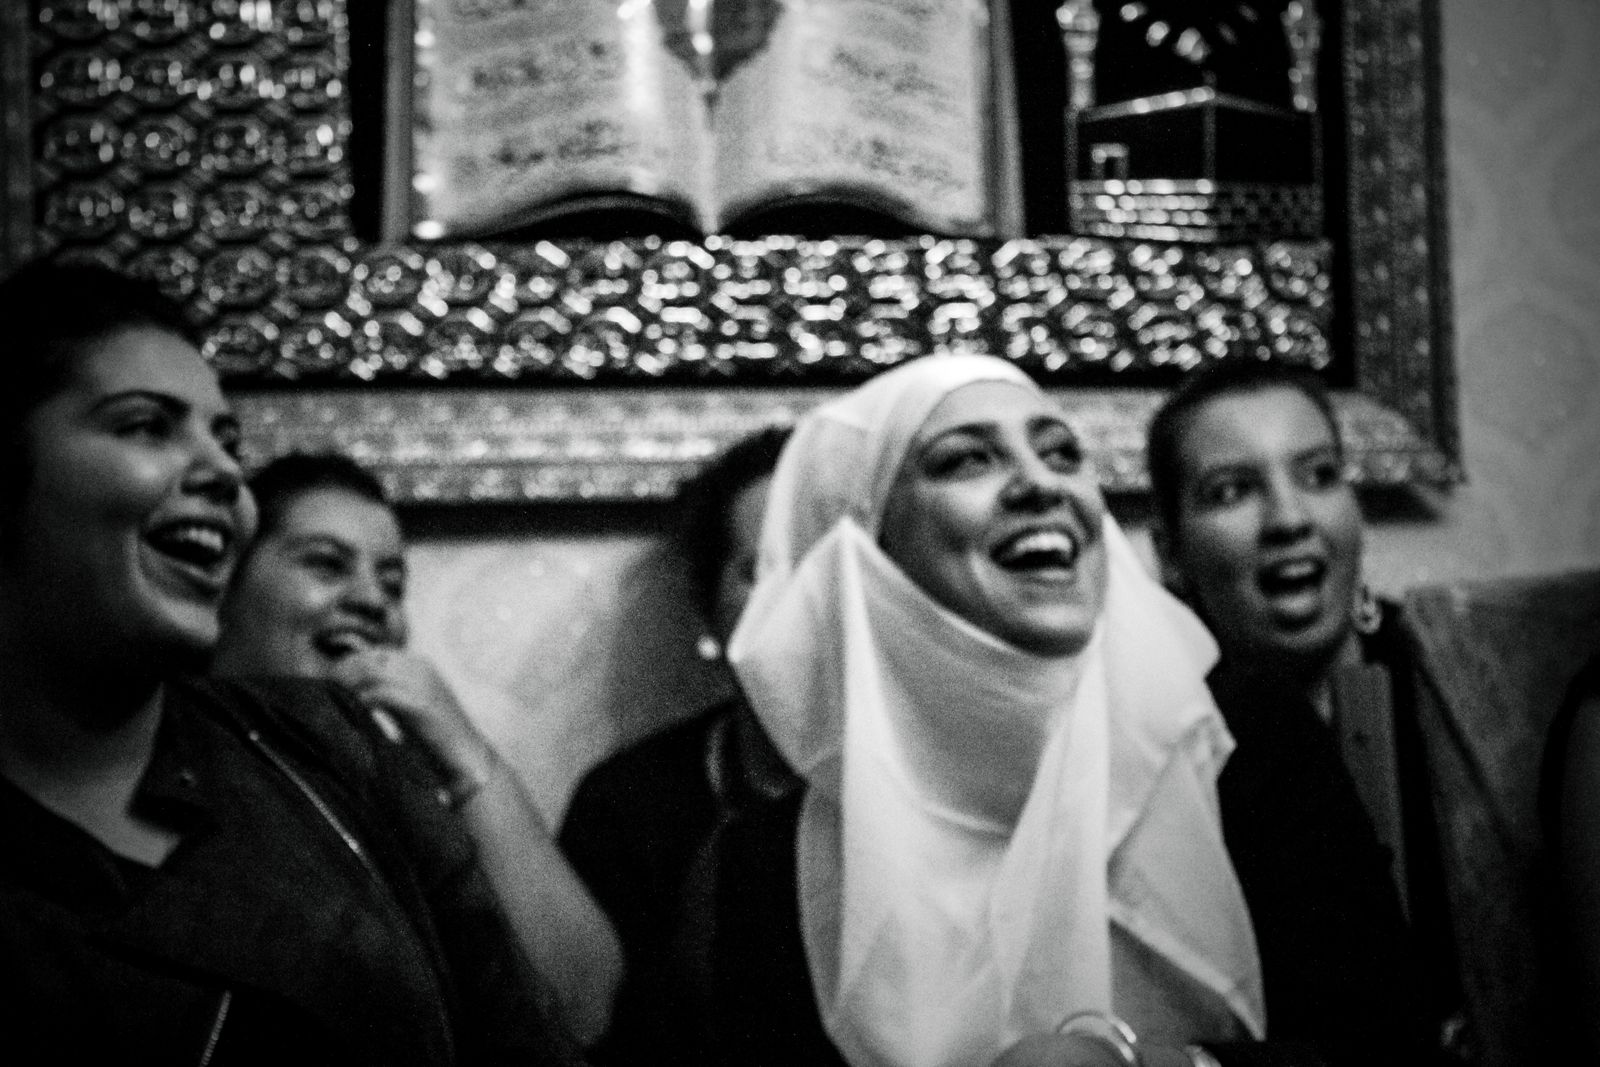 © Claudia Cuomo - Image from the Battle of algiers photography project